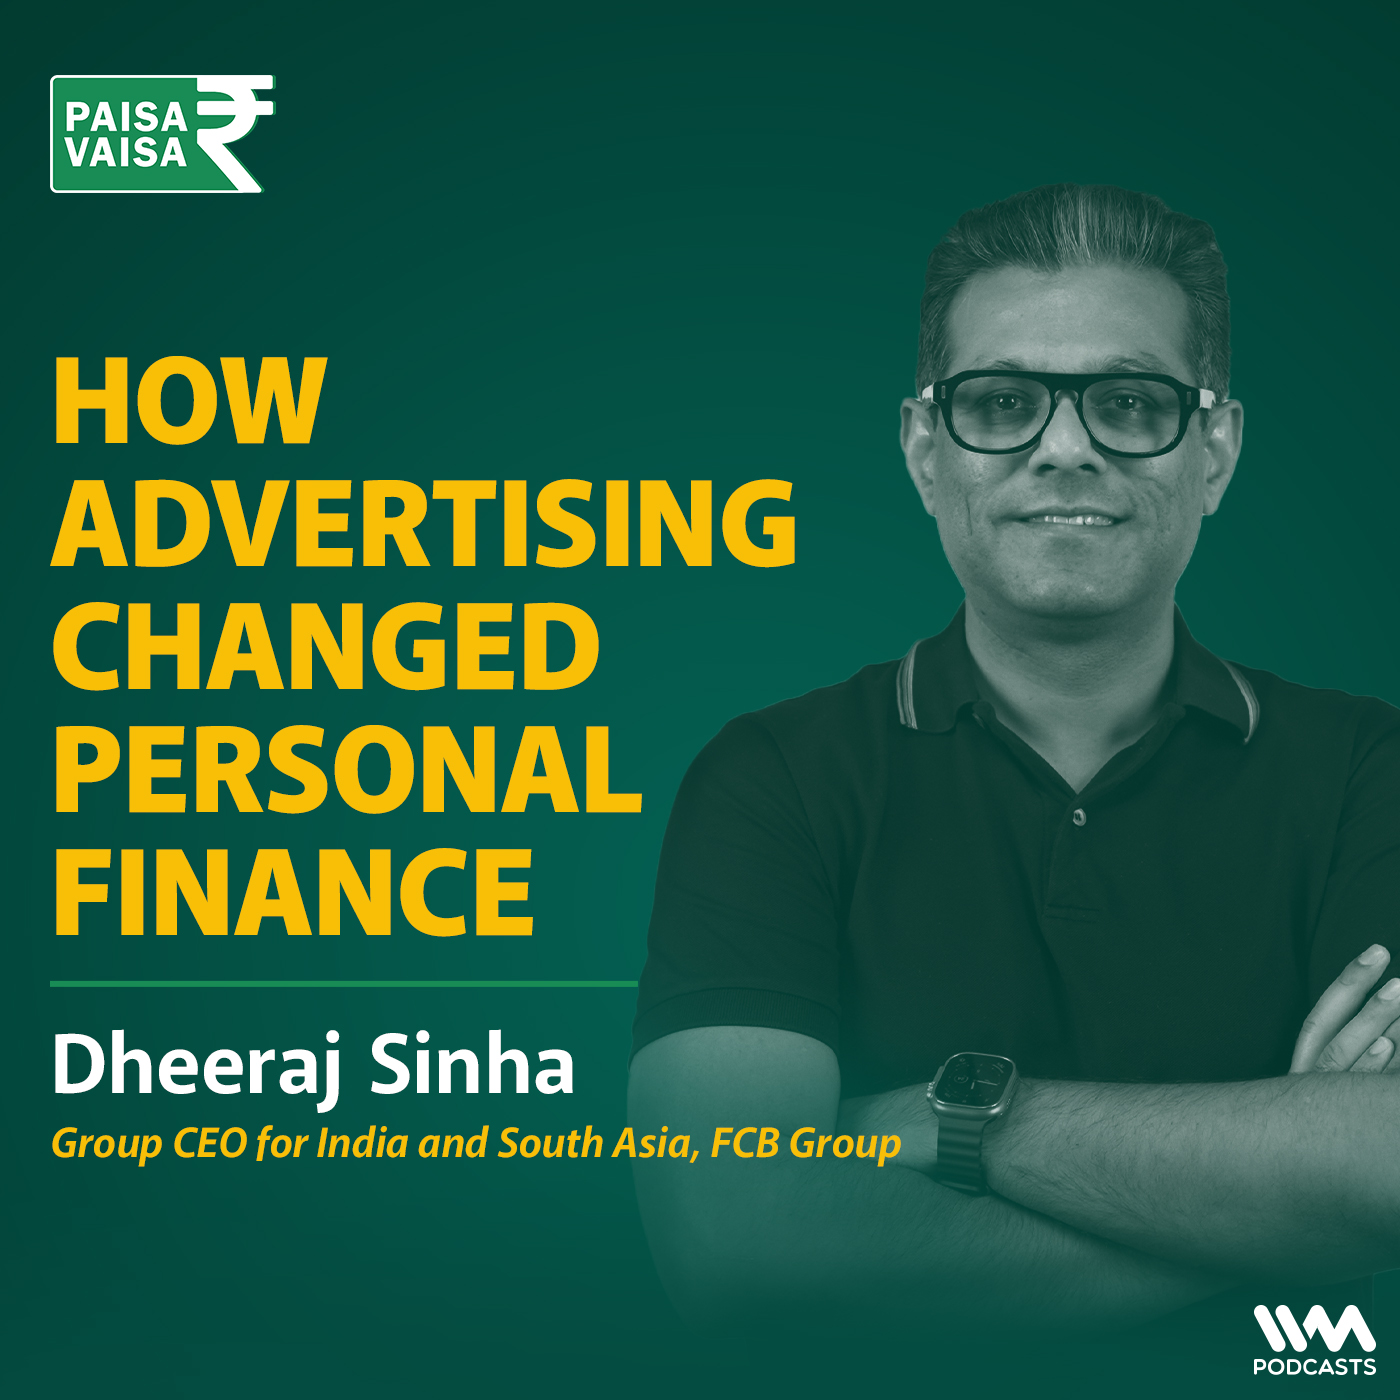 How Advertising changed personal finance Ft. Dheeraj Sinha, Group CEO for India and South Asia, FCB Group